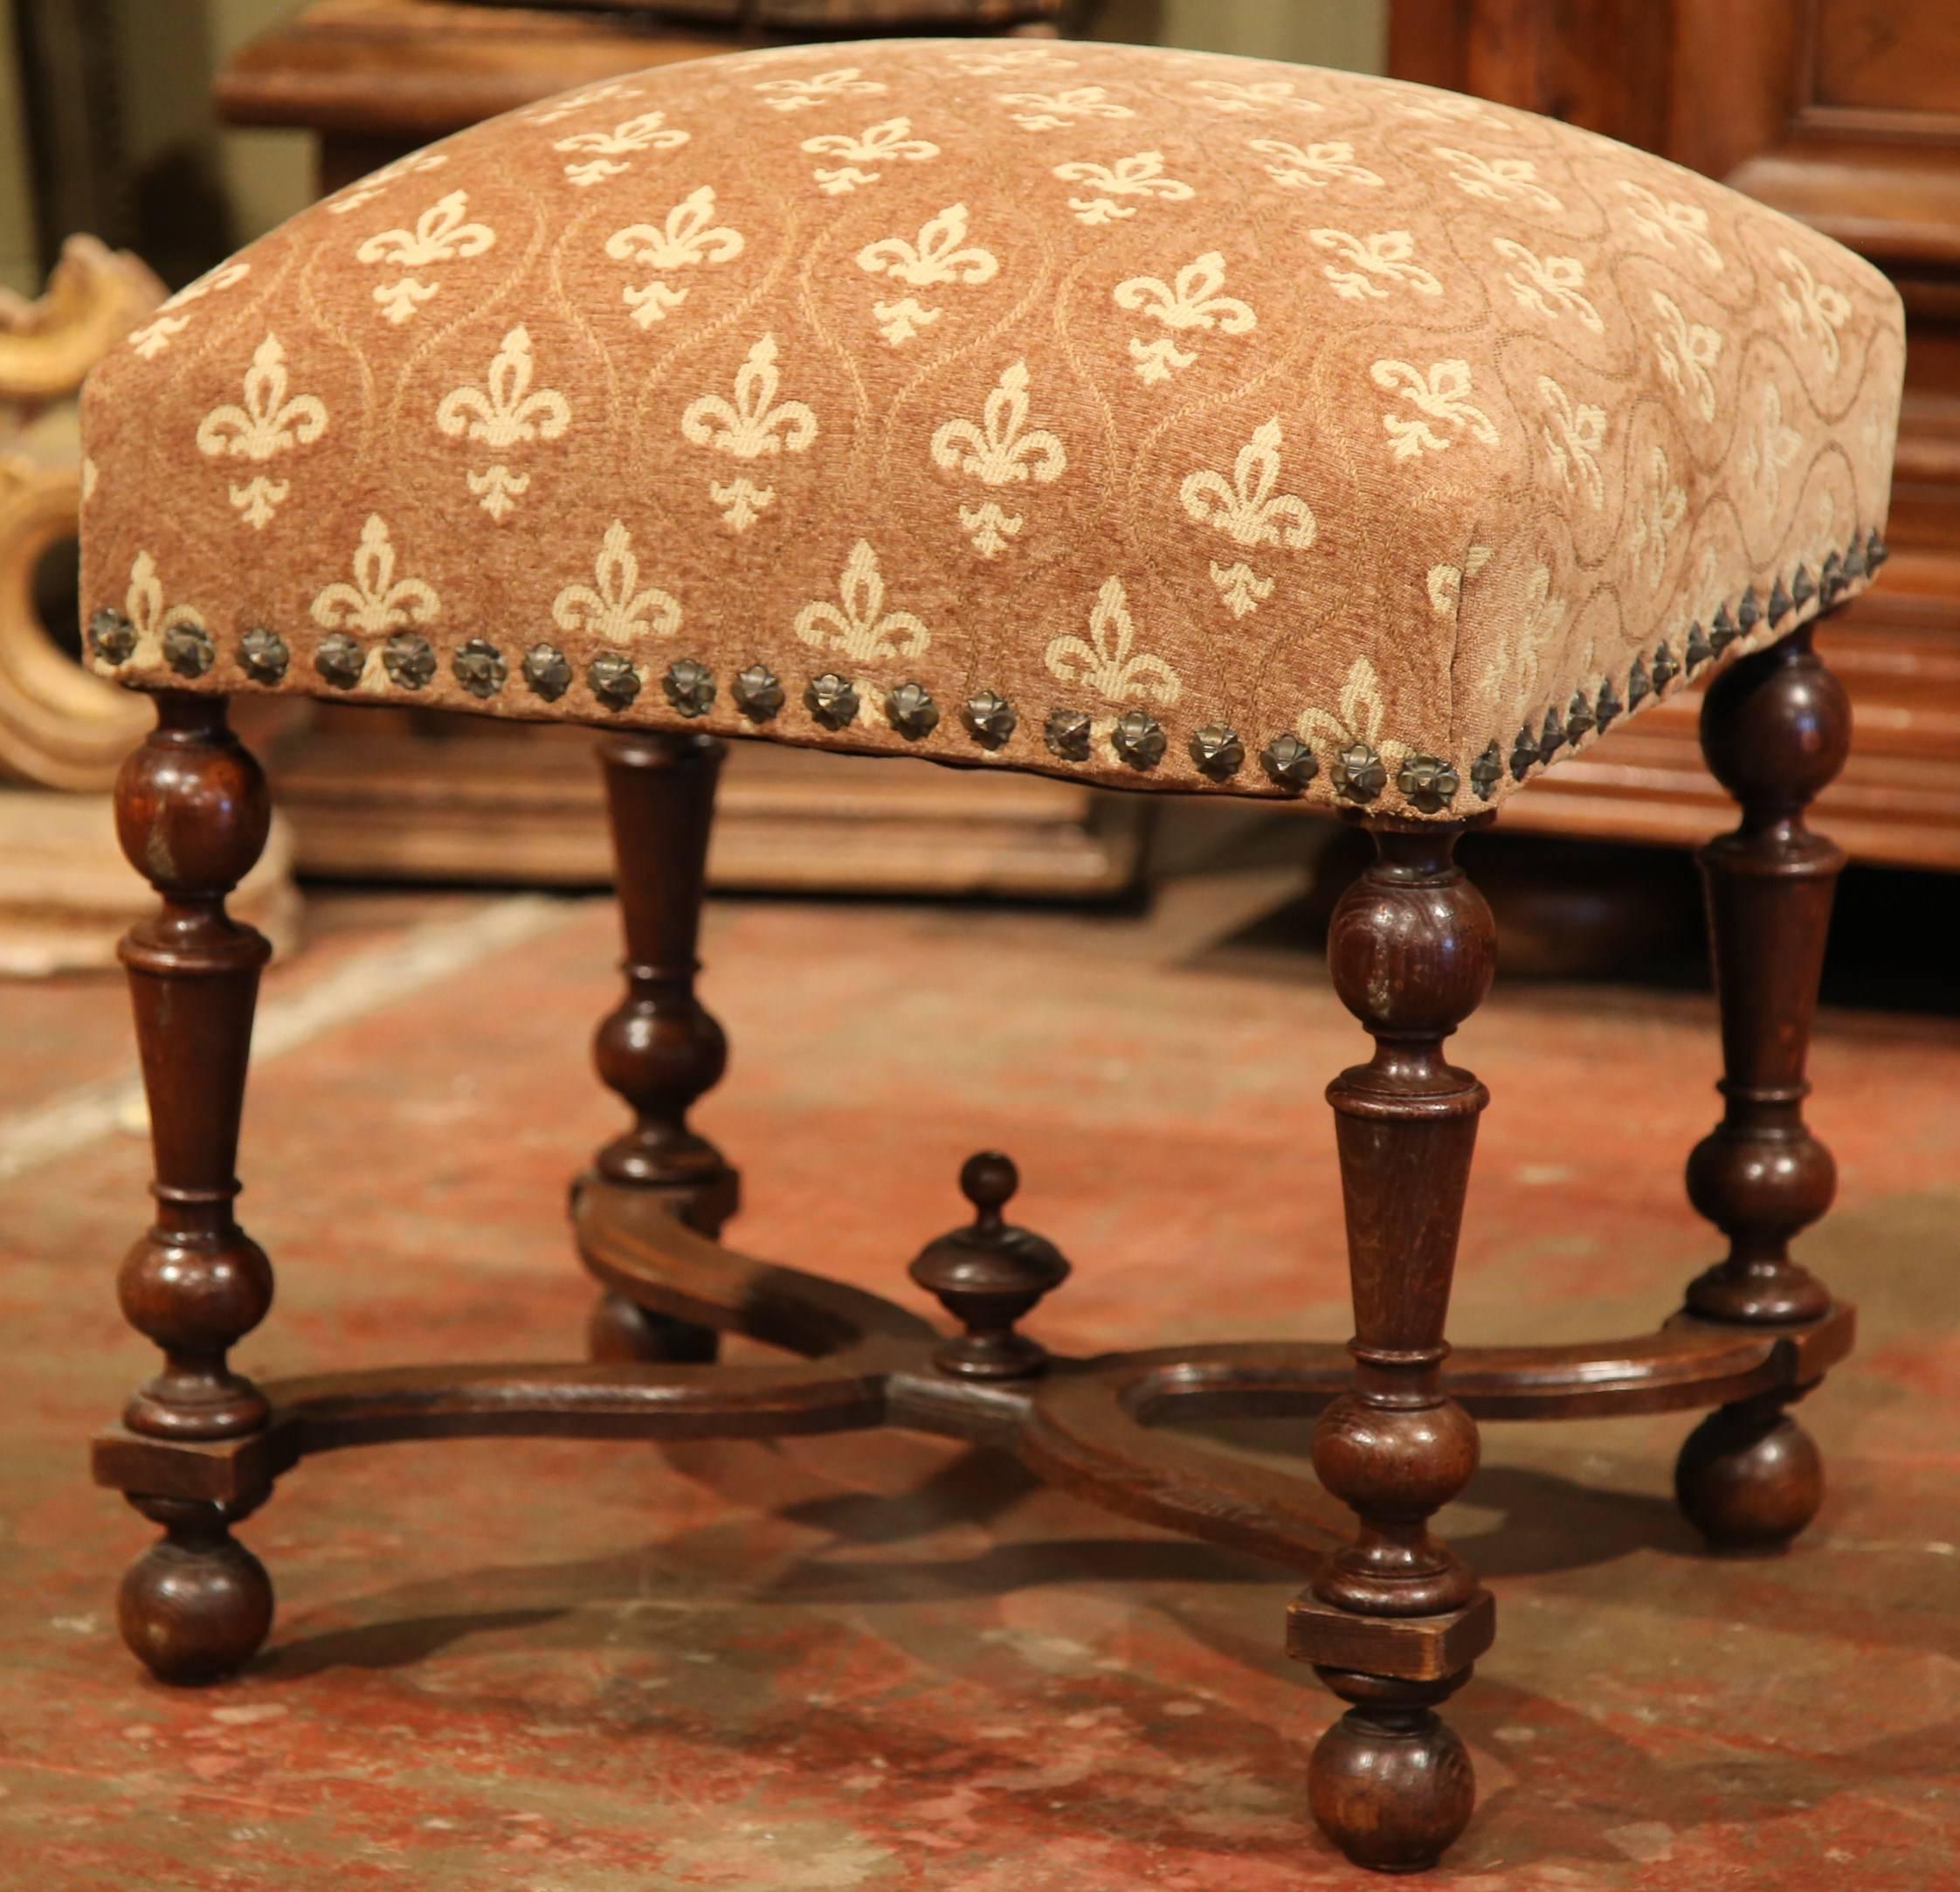 19th Century French Louis III Carved Walnut Stool with Fleur-de-Lys Fabric (Louis XIII.)